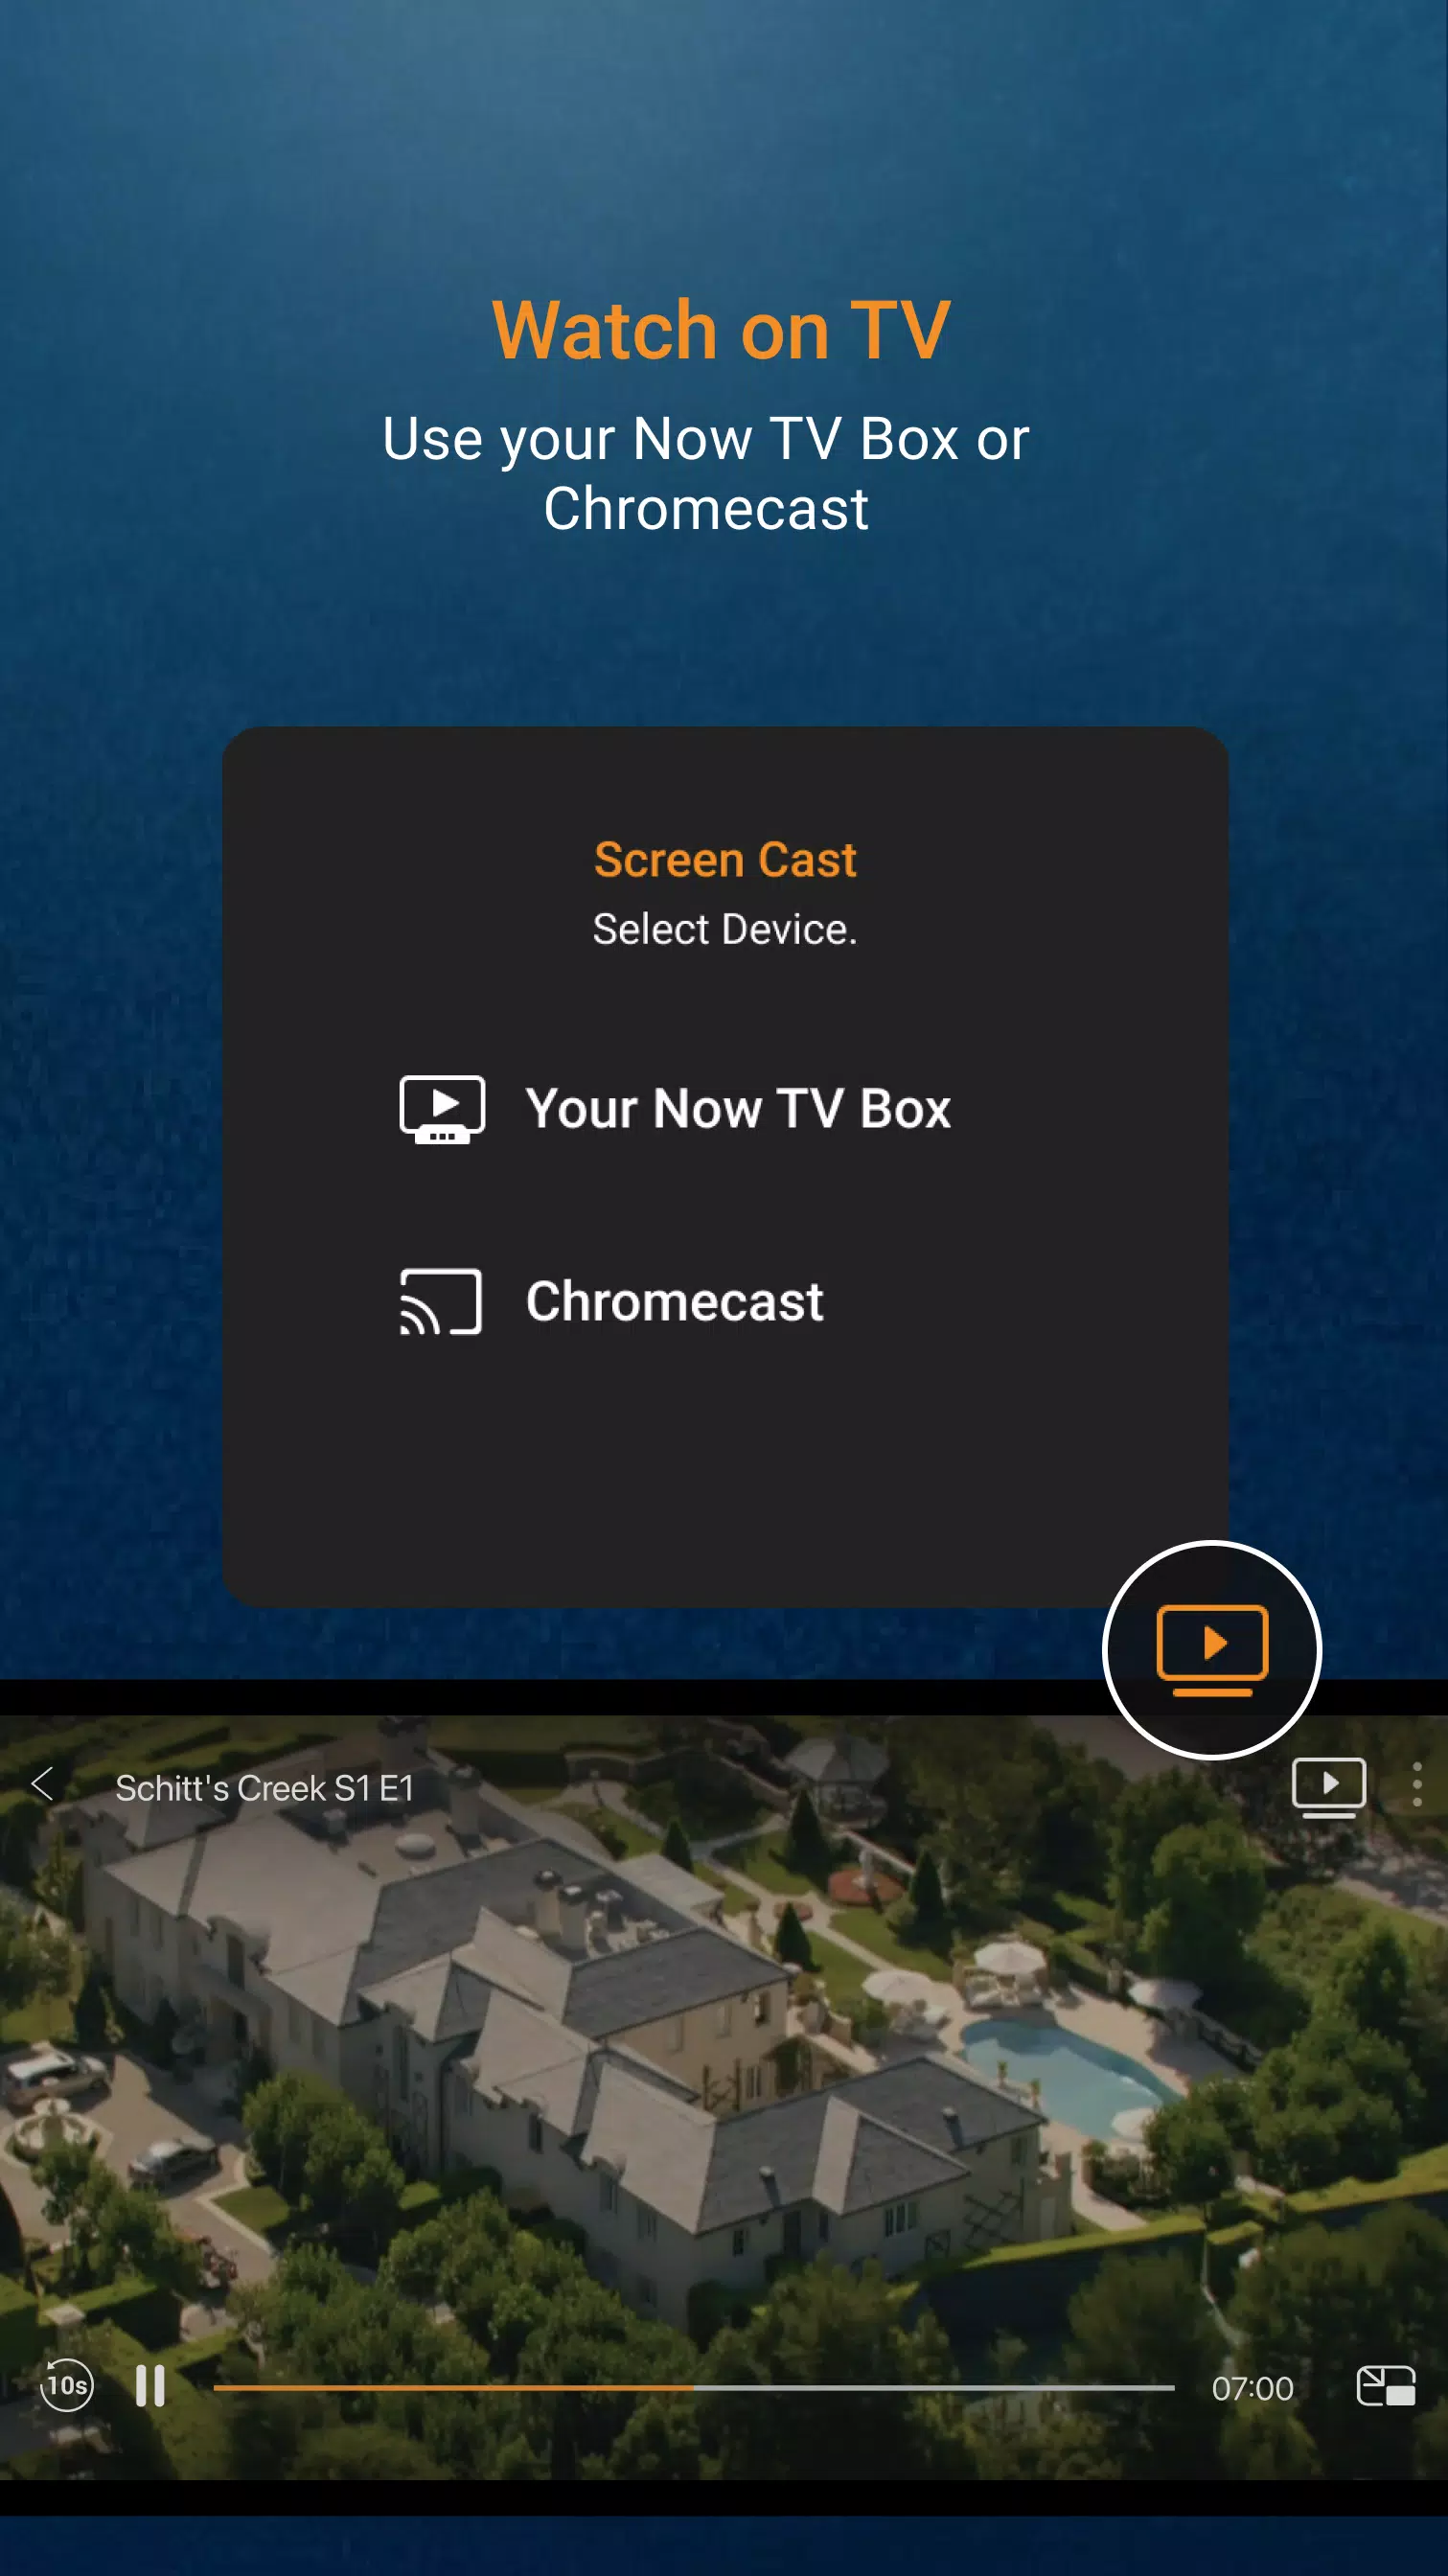 Display NOW TV Player APK for Android Download